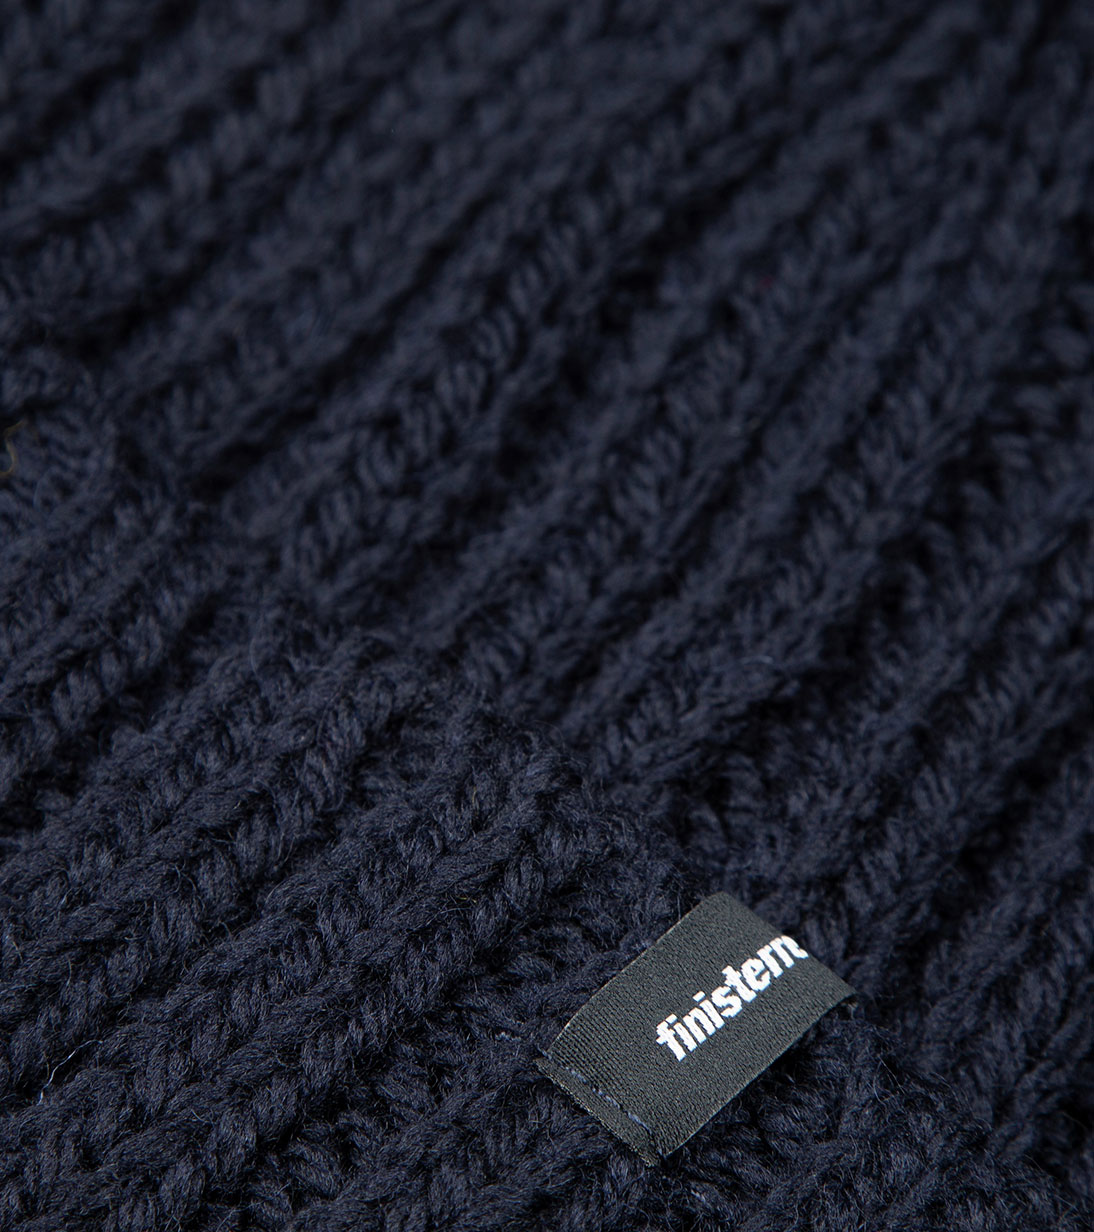 Made from: Merino Wool blend